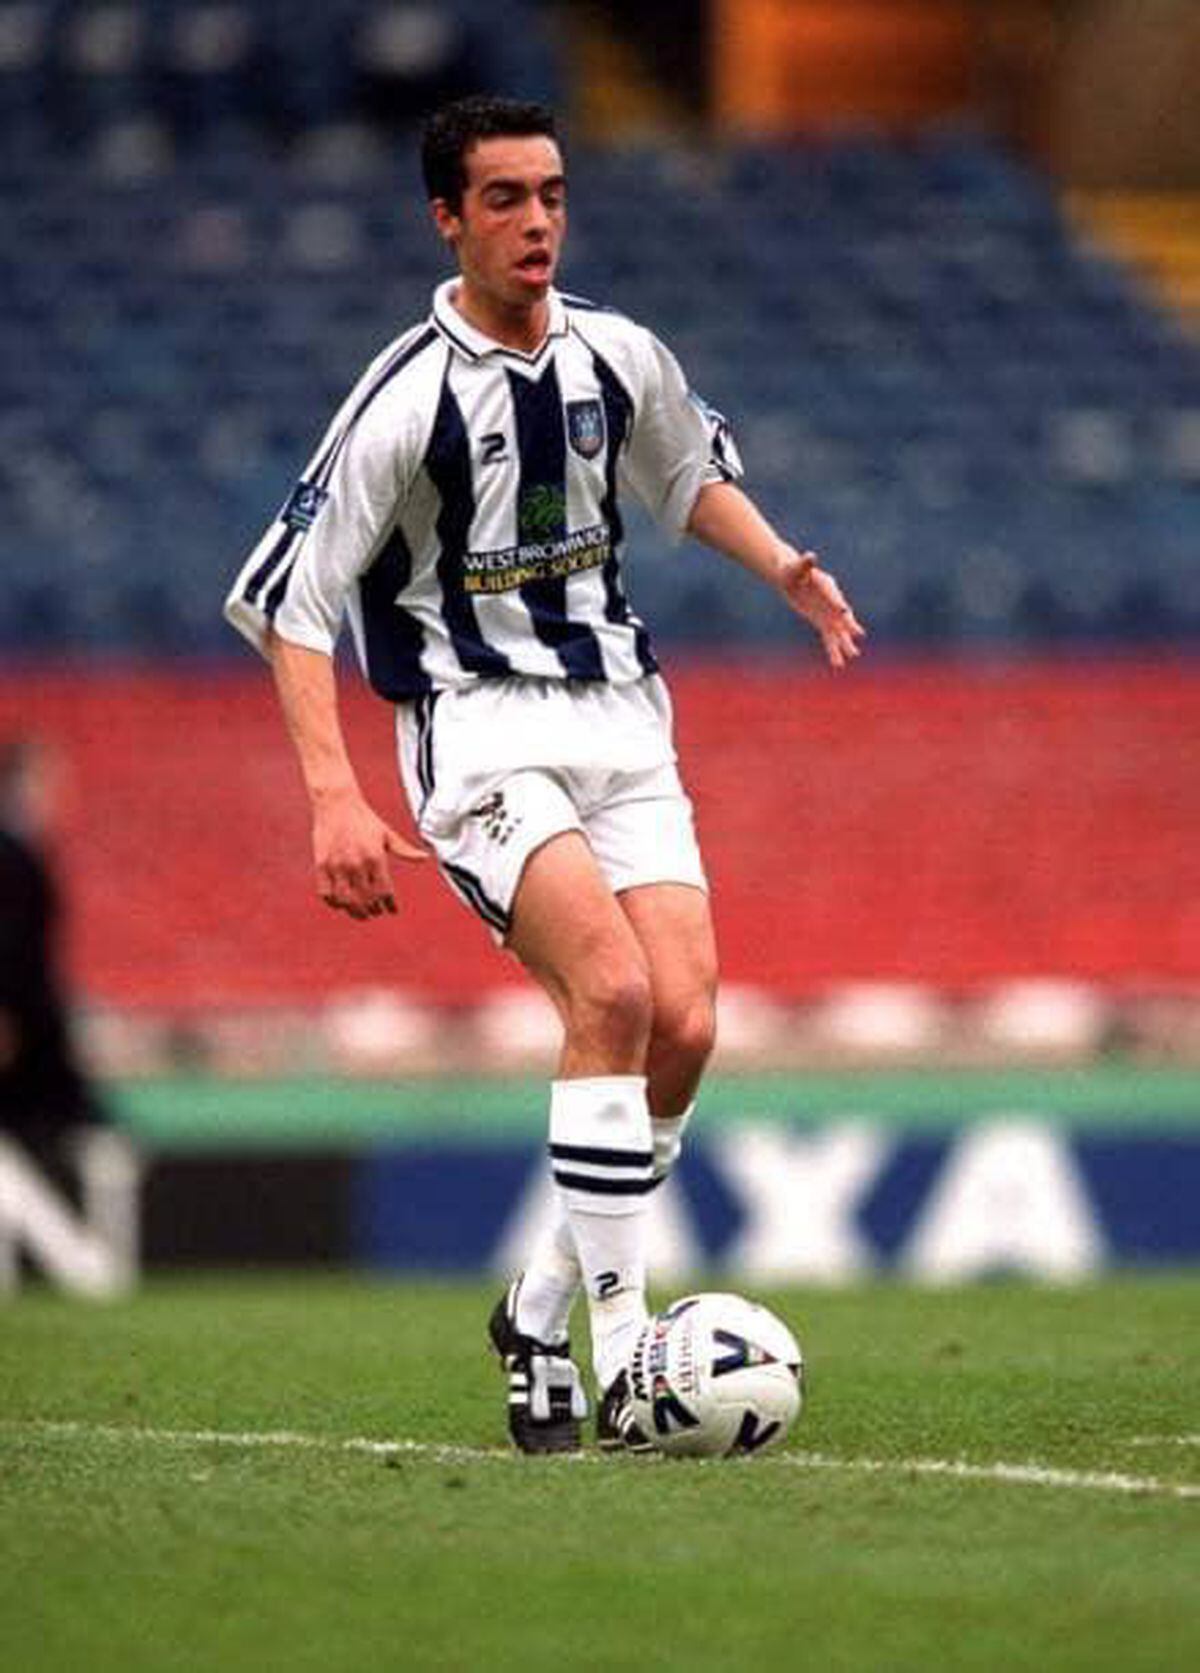 Mark Briggs playing for Albion